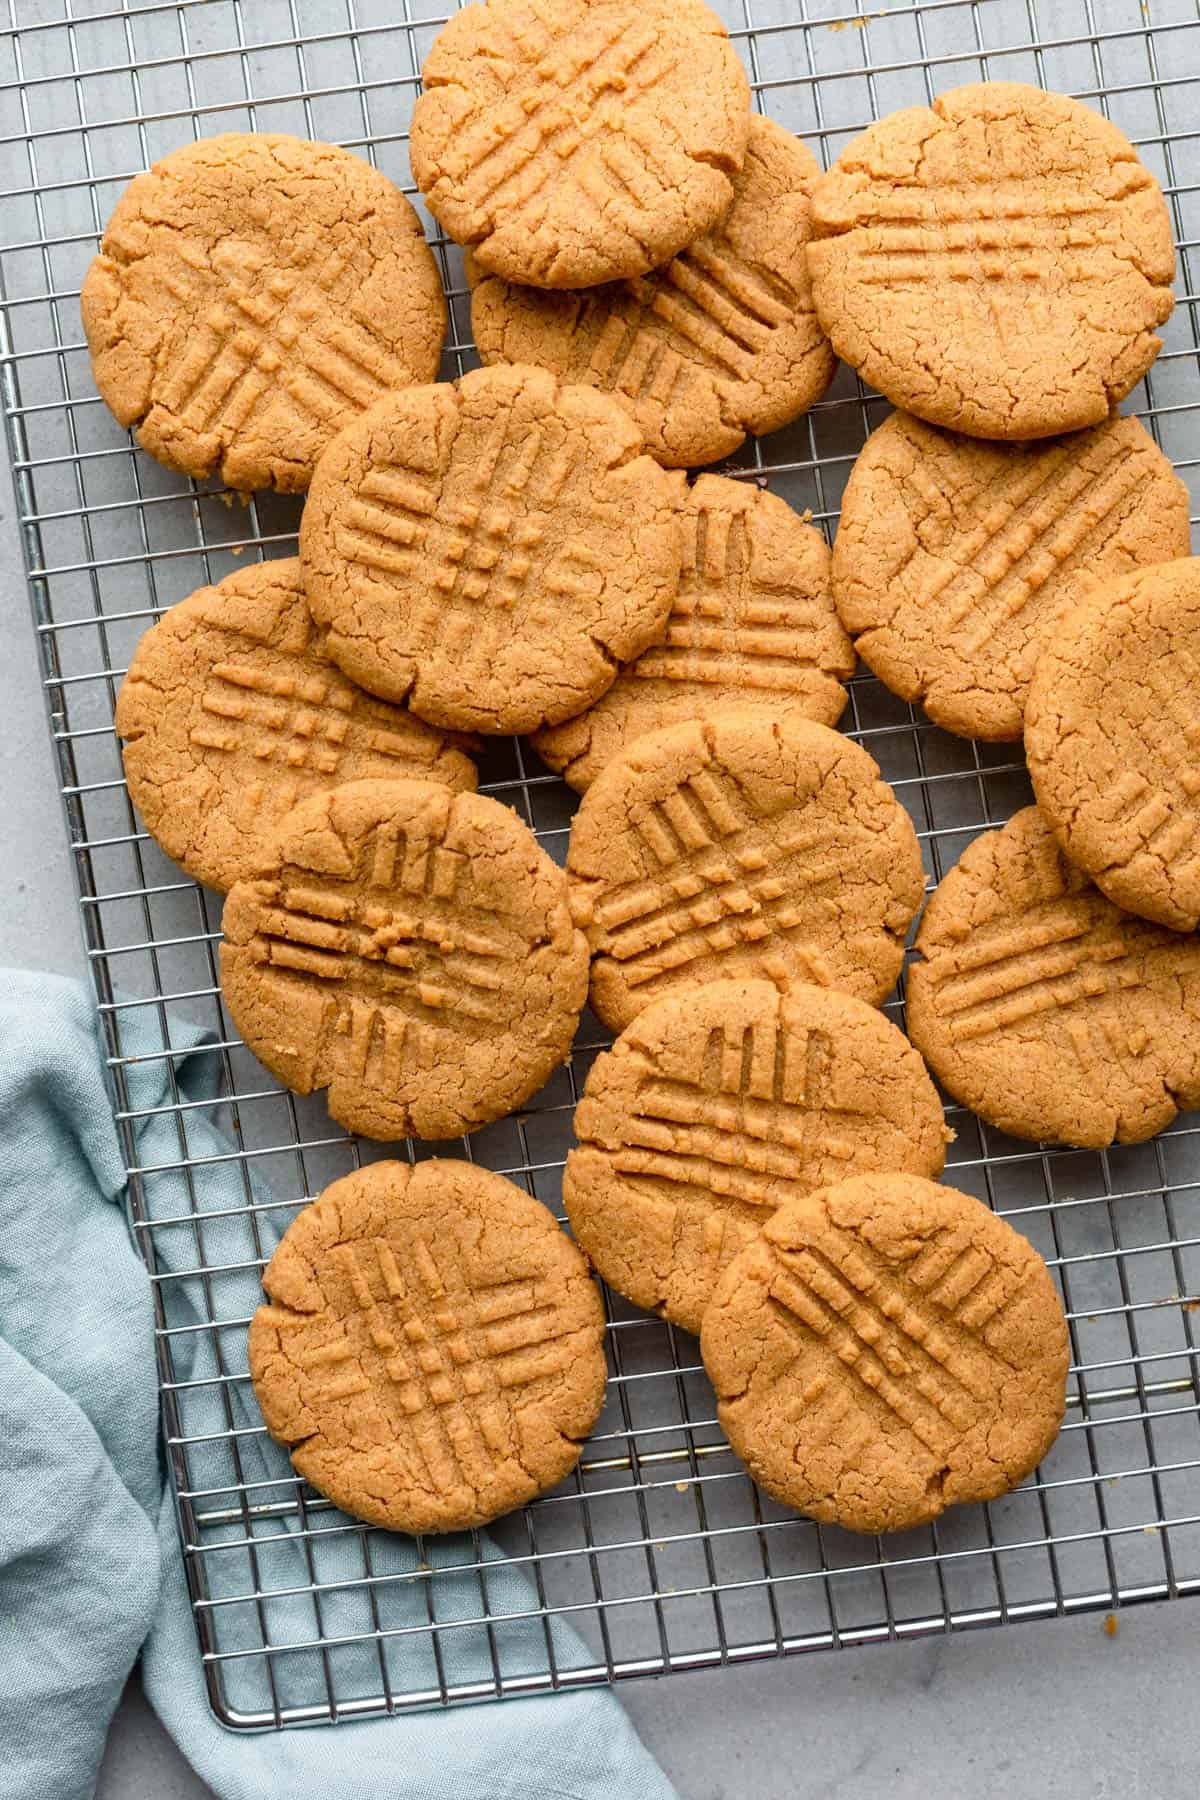 You Only Need 3 Ingredients To Make These Crunchy, Dairy-Free Peanut Butter Cookies  